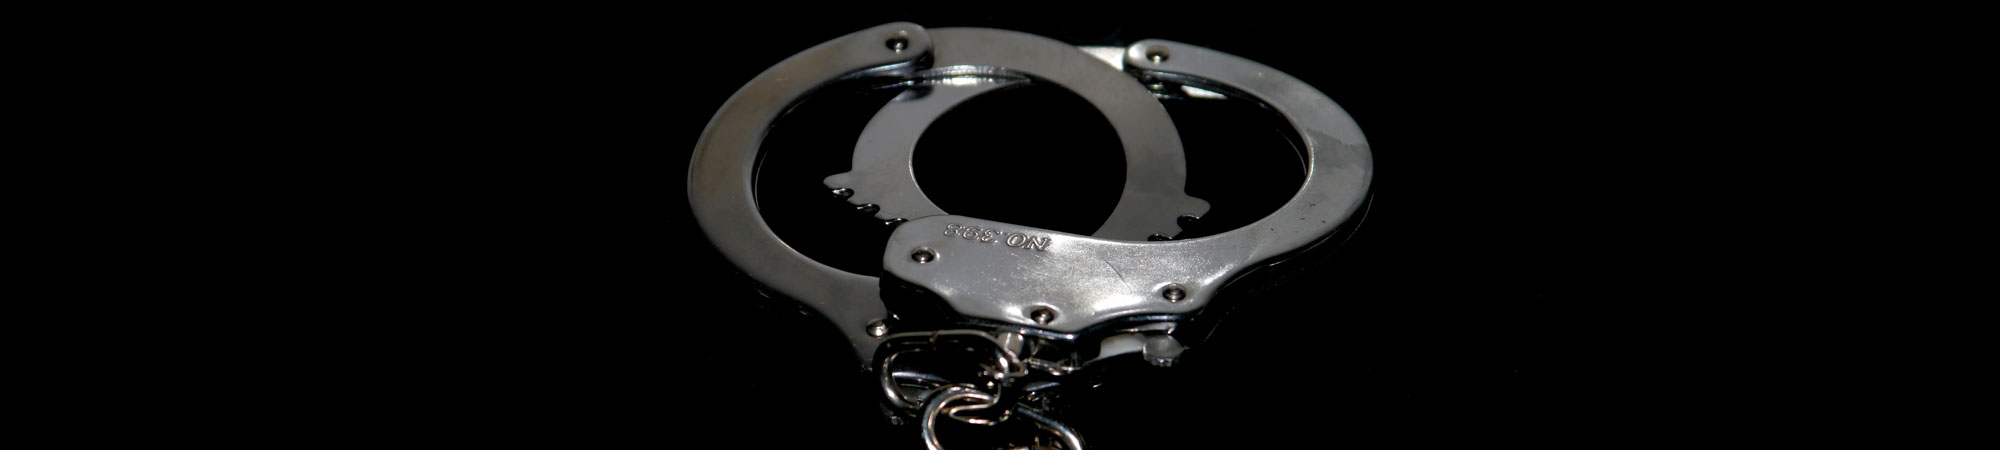 A pair of open, silver handcuffs laying on a reflective black surface under a dim light, creating a dramatic effect with sharp contrasts.